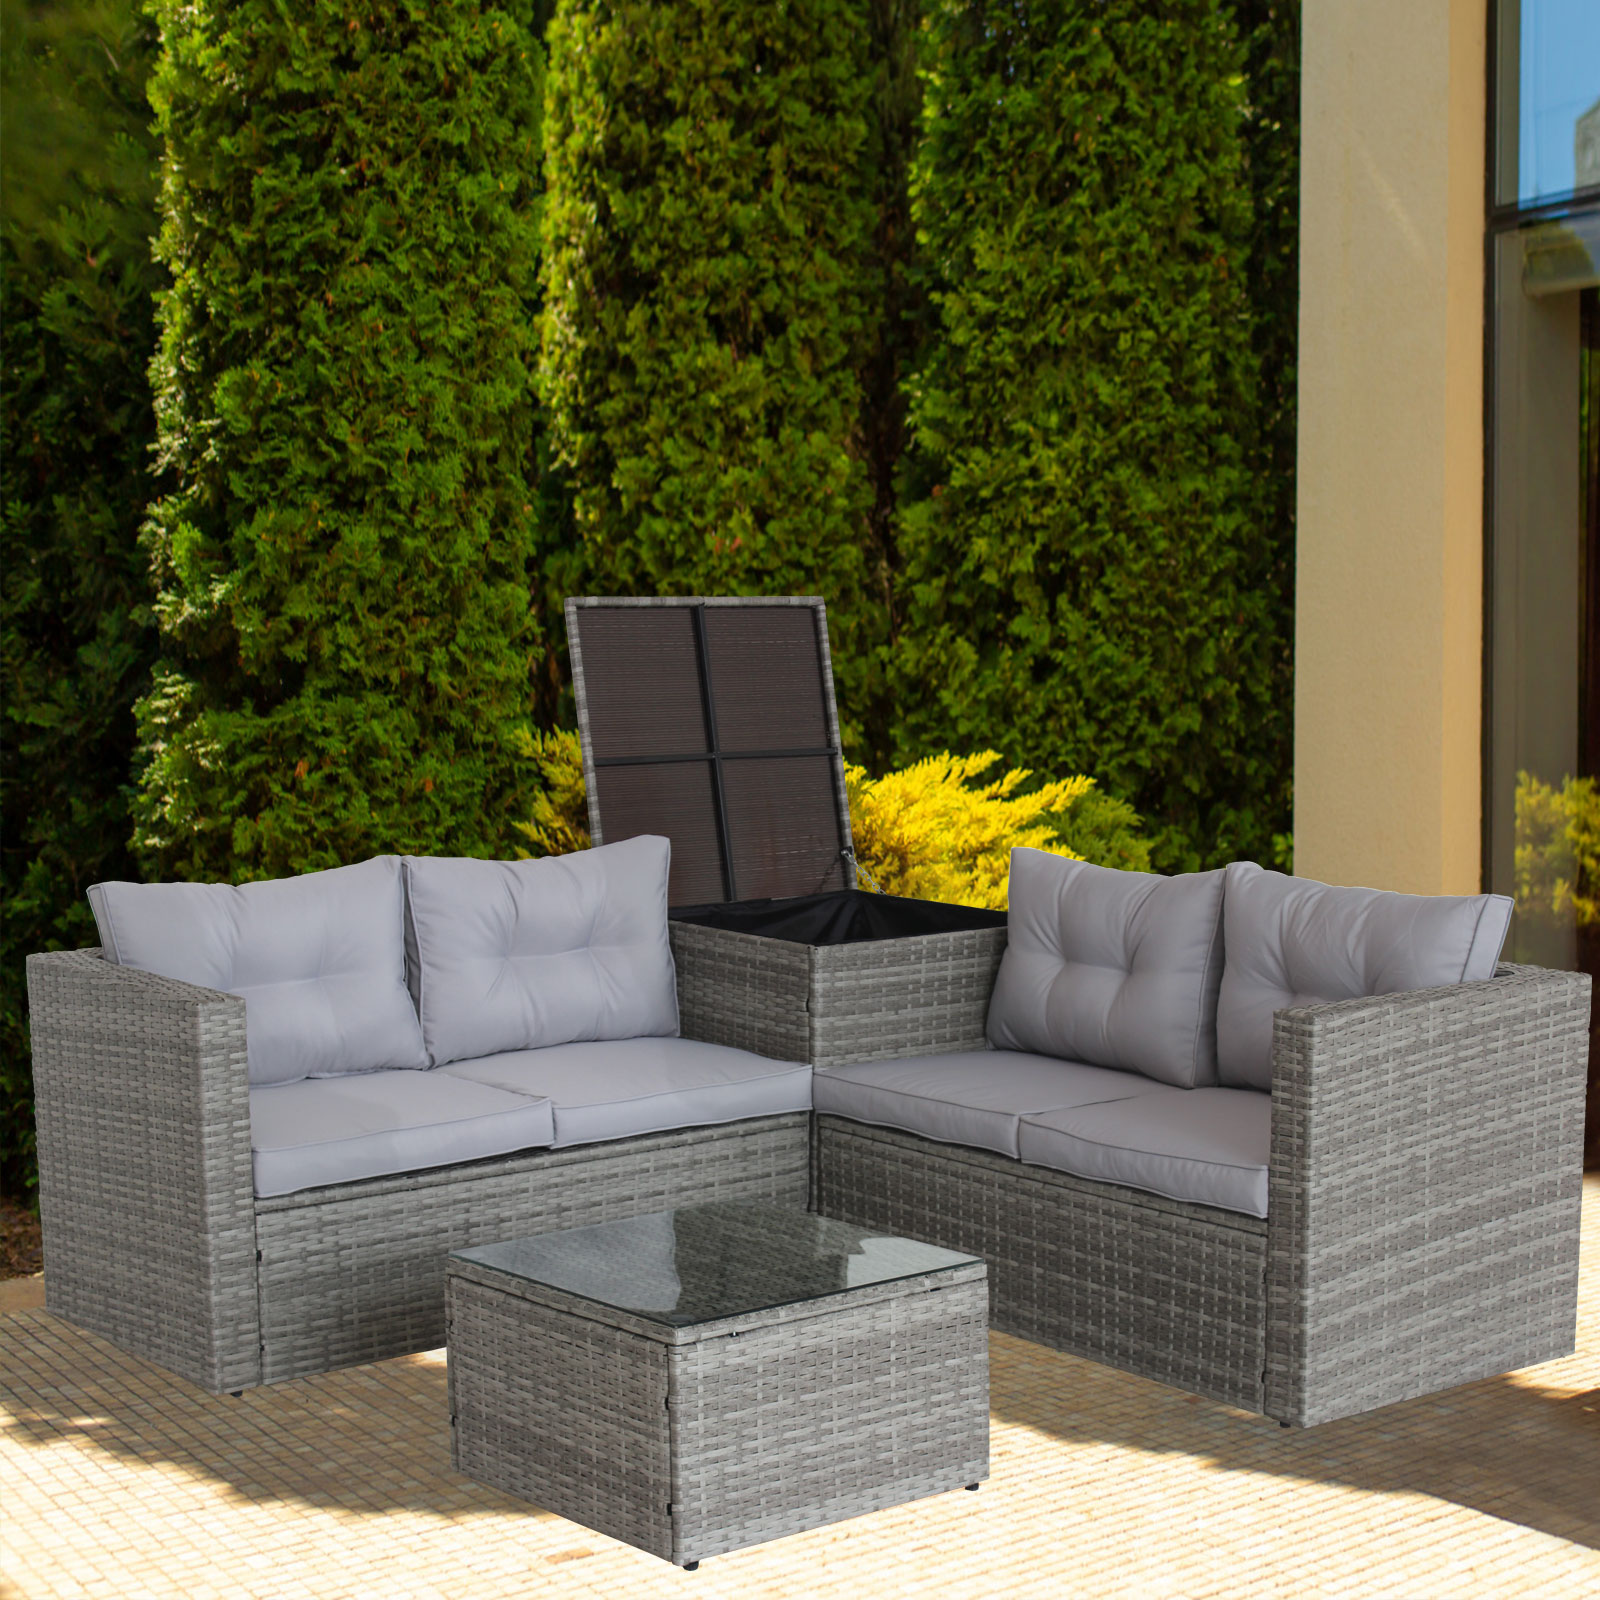 Outdoor Patio Furniture Set, 4-Piece Gray Wicker Patio Furniture Sets, Rattan Wicker Conversation Set w/L-Seats Sofa, R-Seats Sofa, Cushion box, Glass Dining Table, Padded Cushions, Beige, S1555 - image 3 of 10